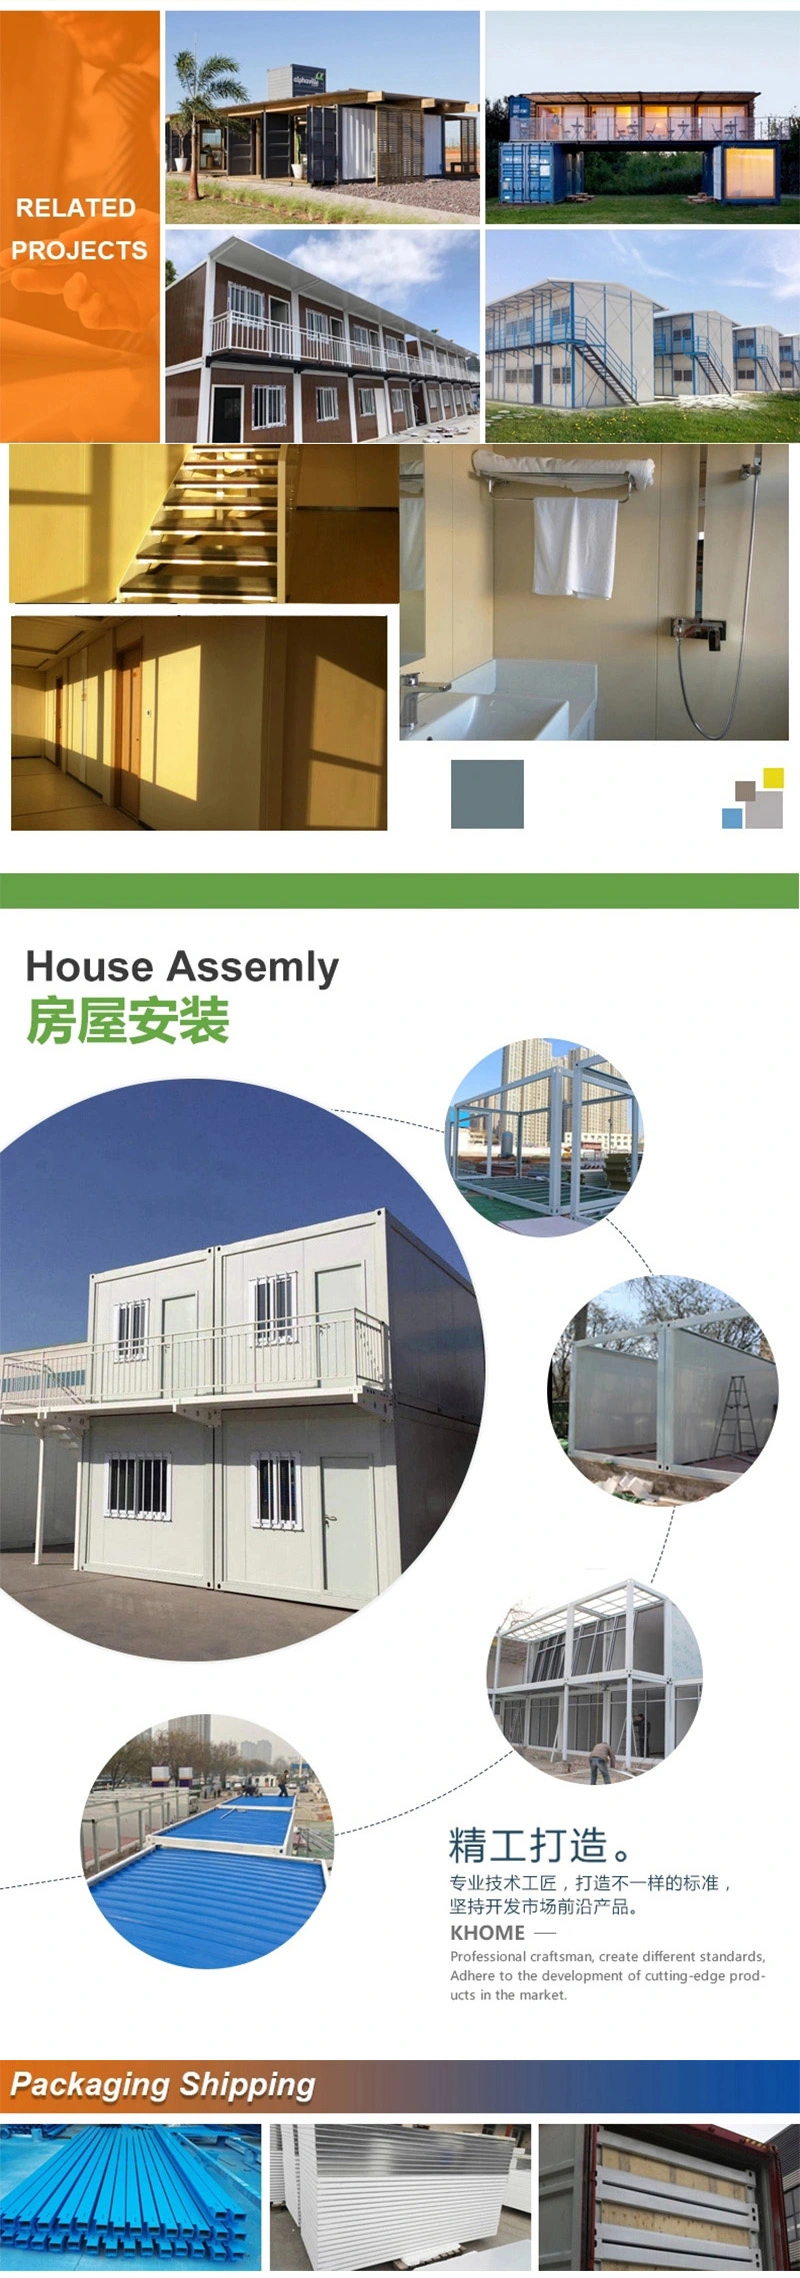 flat packing house container,flat packing container house,moible,flat packing living container,house container flat